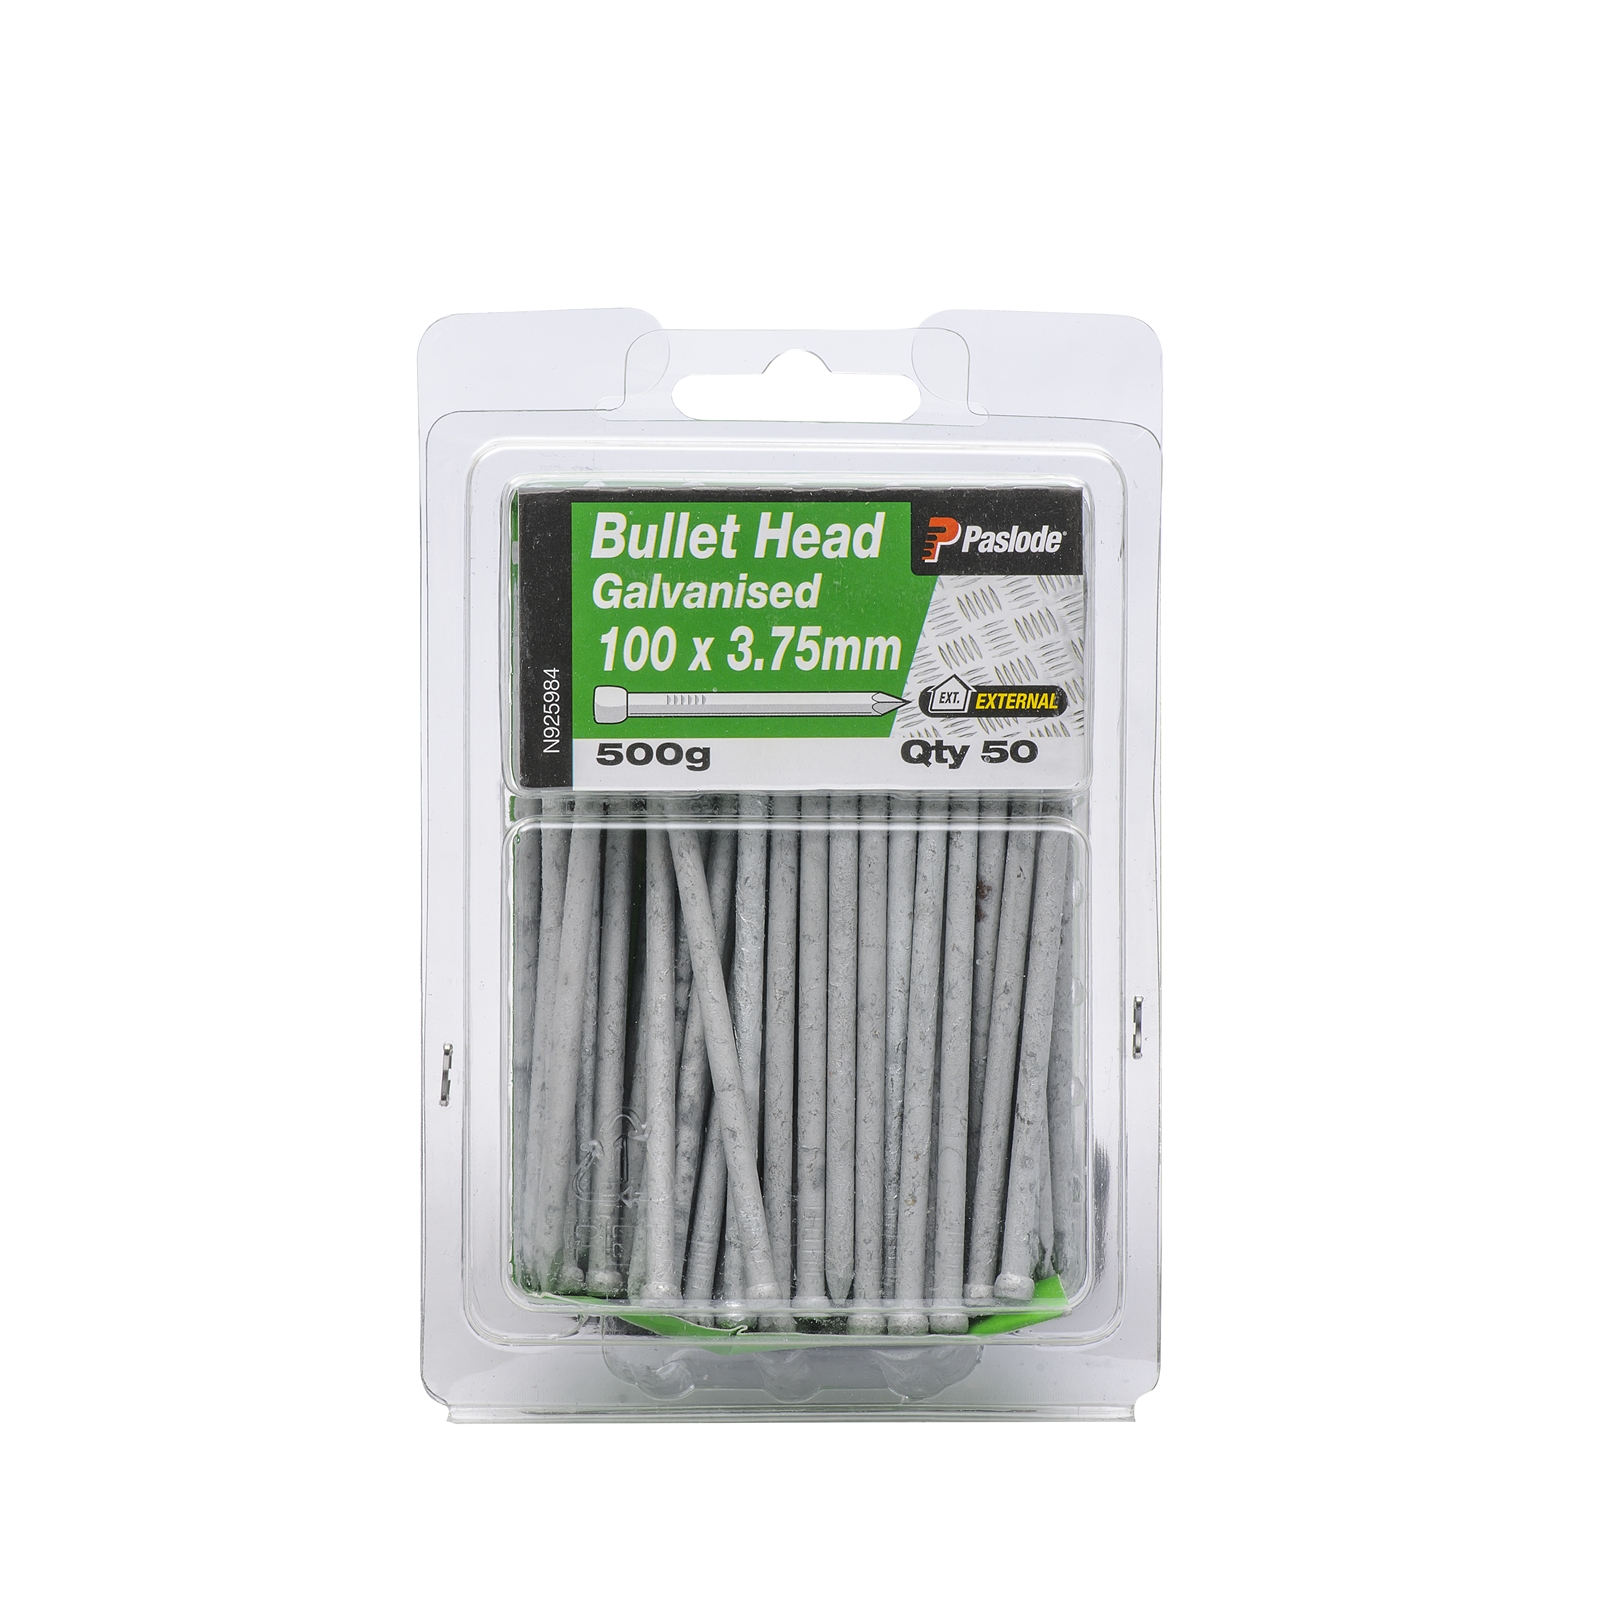 Paslode 100 x 3.75mm 500g Galvanised Bullet Head Nails - 50 Pack